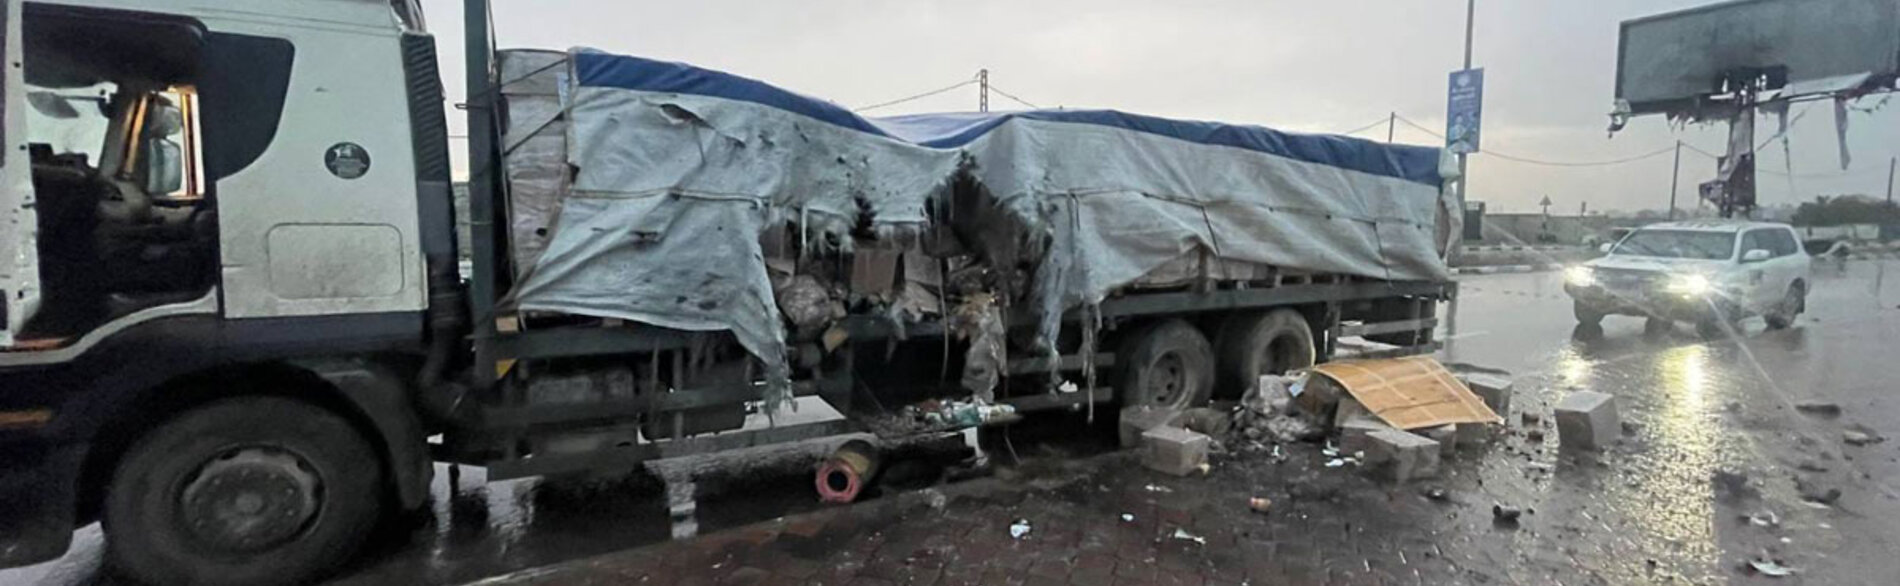 On 5 February, an aid convoy waiting to move to northern Gaza was hit by gunfire, thankfully resulting in no casualties, the Deputy Humanitarian Coordinator reported. Photo by UNRWA